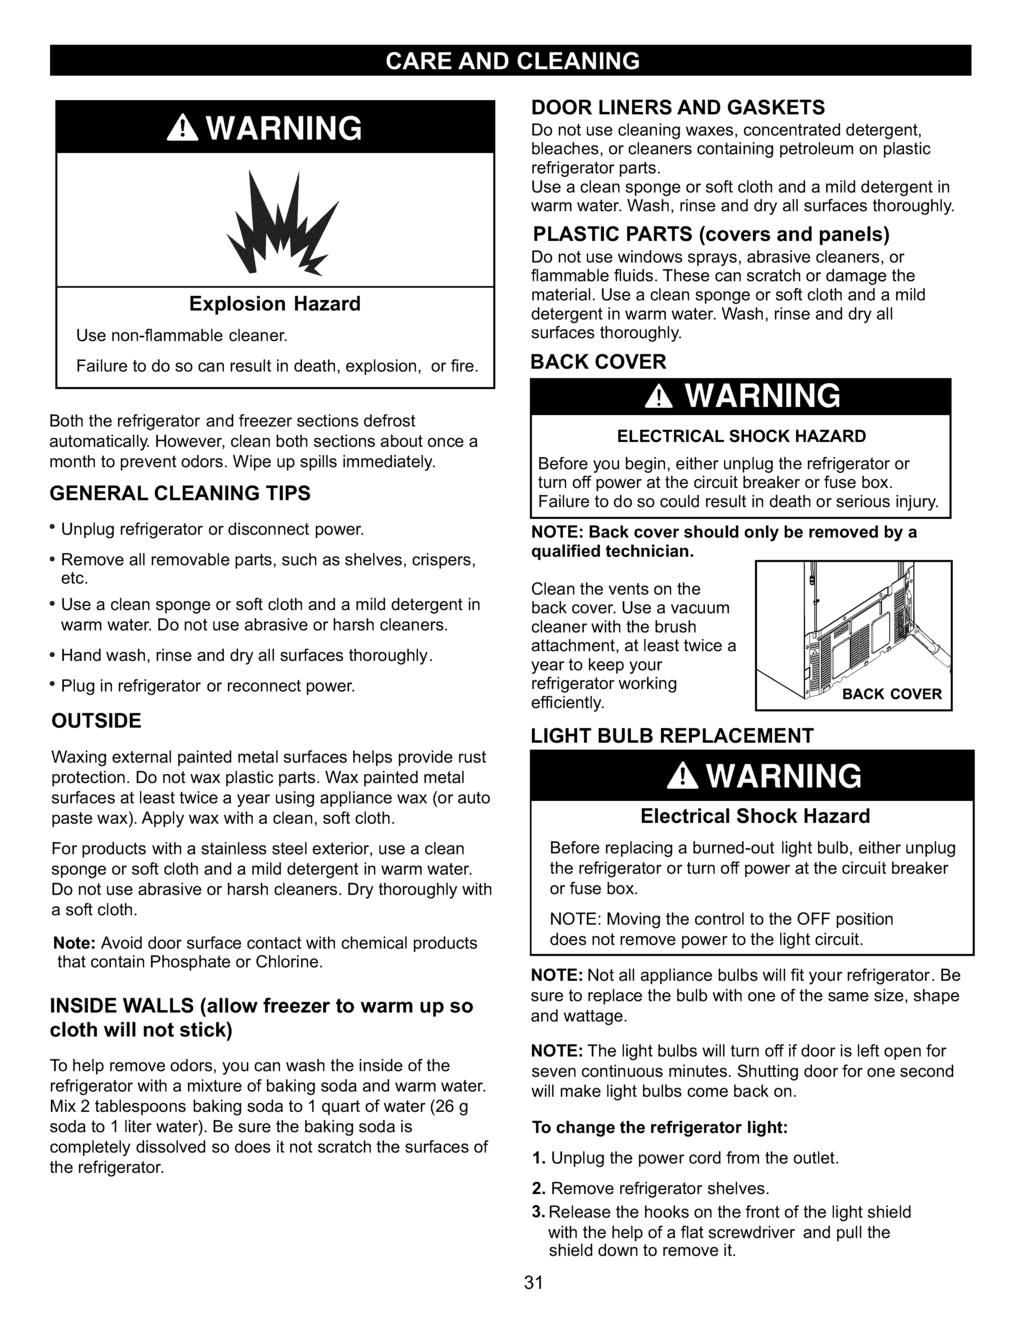 Explosion Hazard Use non-flammable cleaner. Failure to do so can result in death, explosion, or fire.